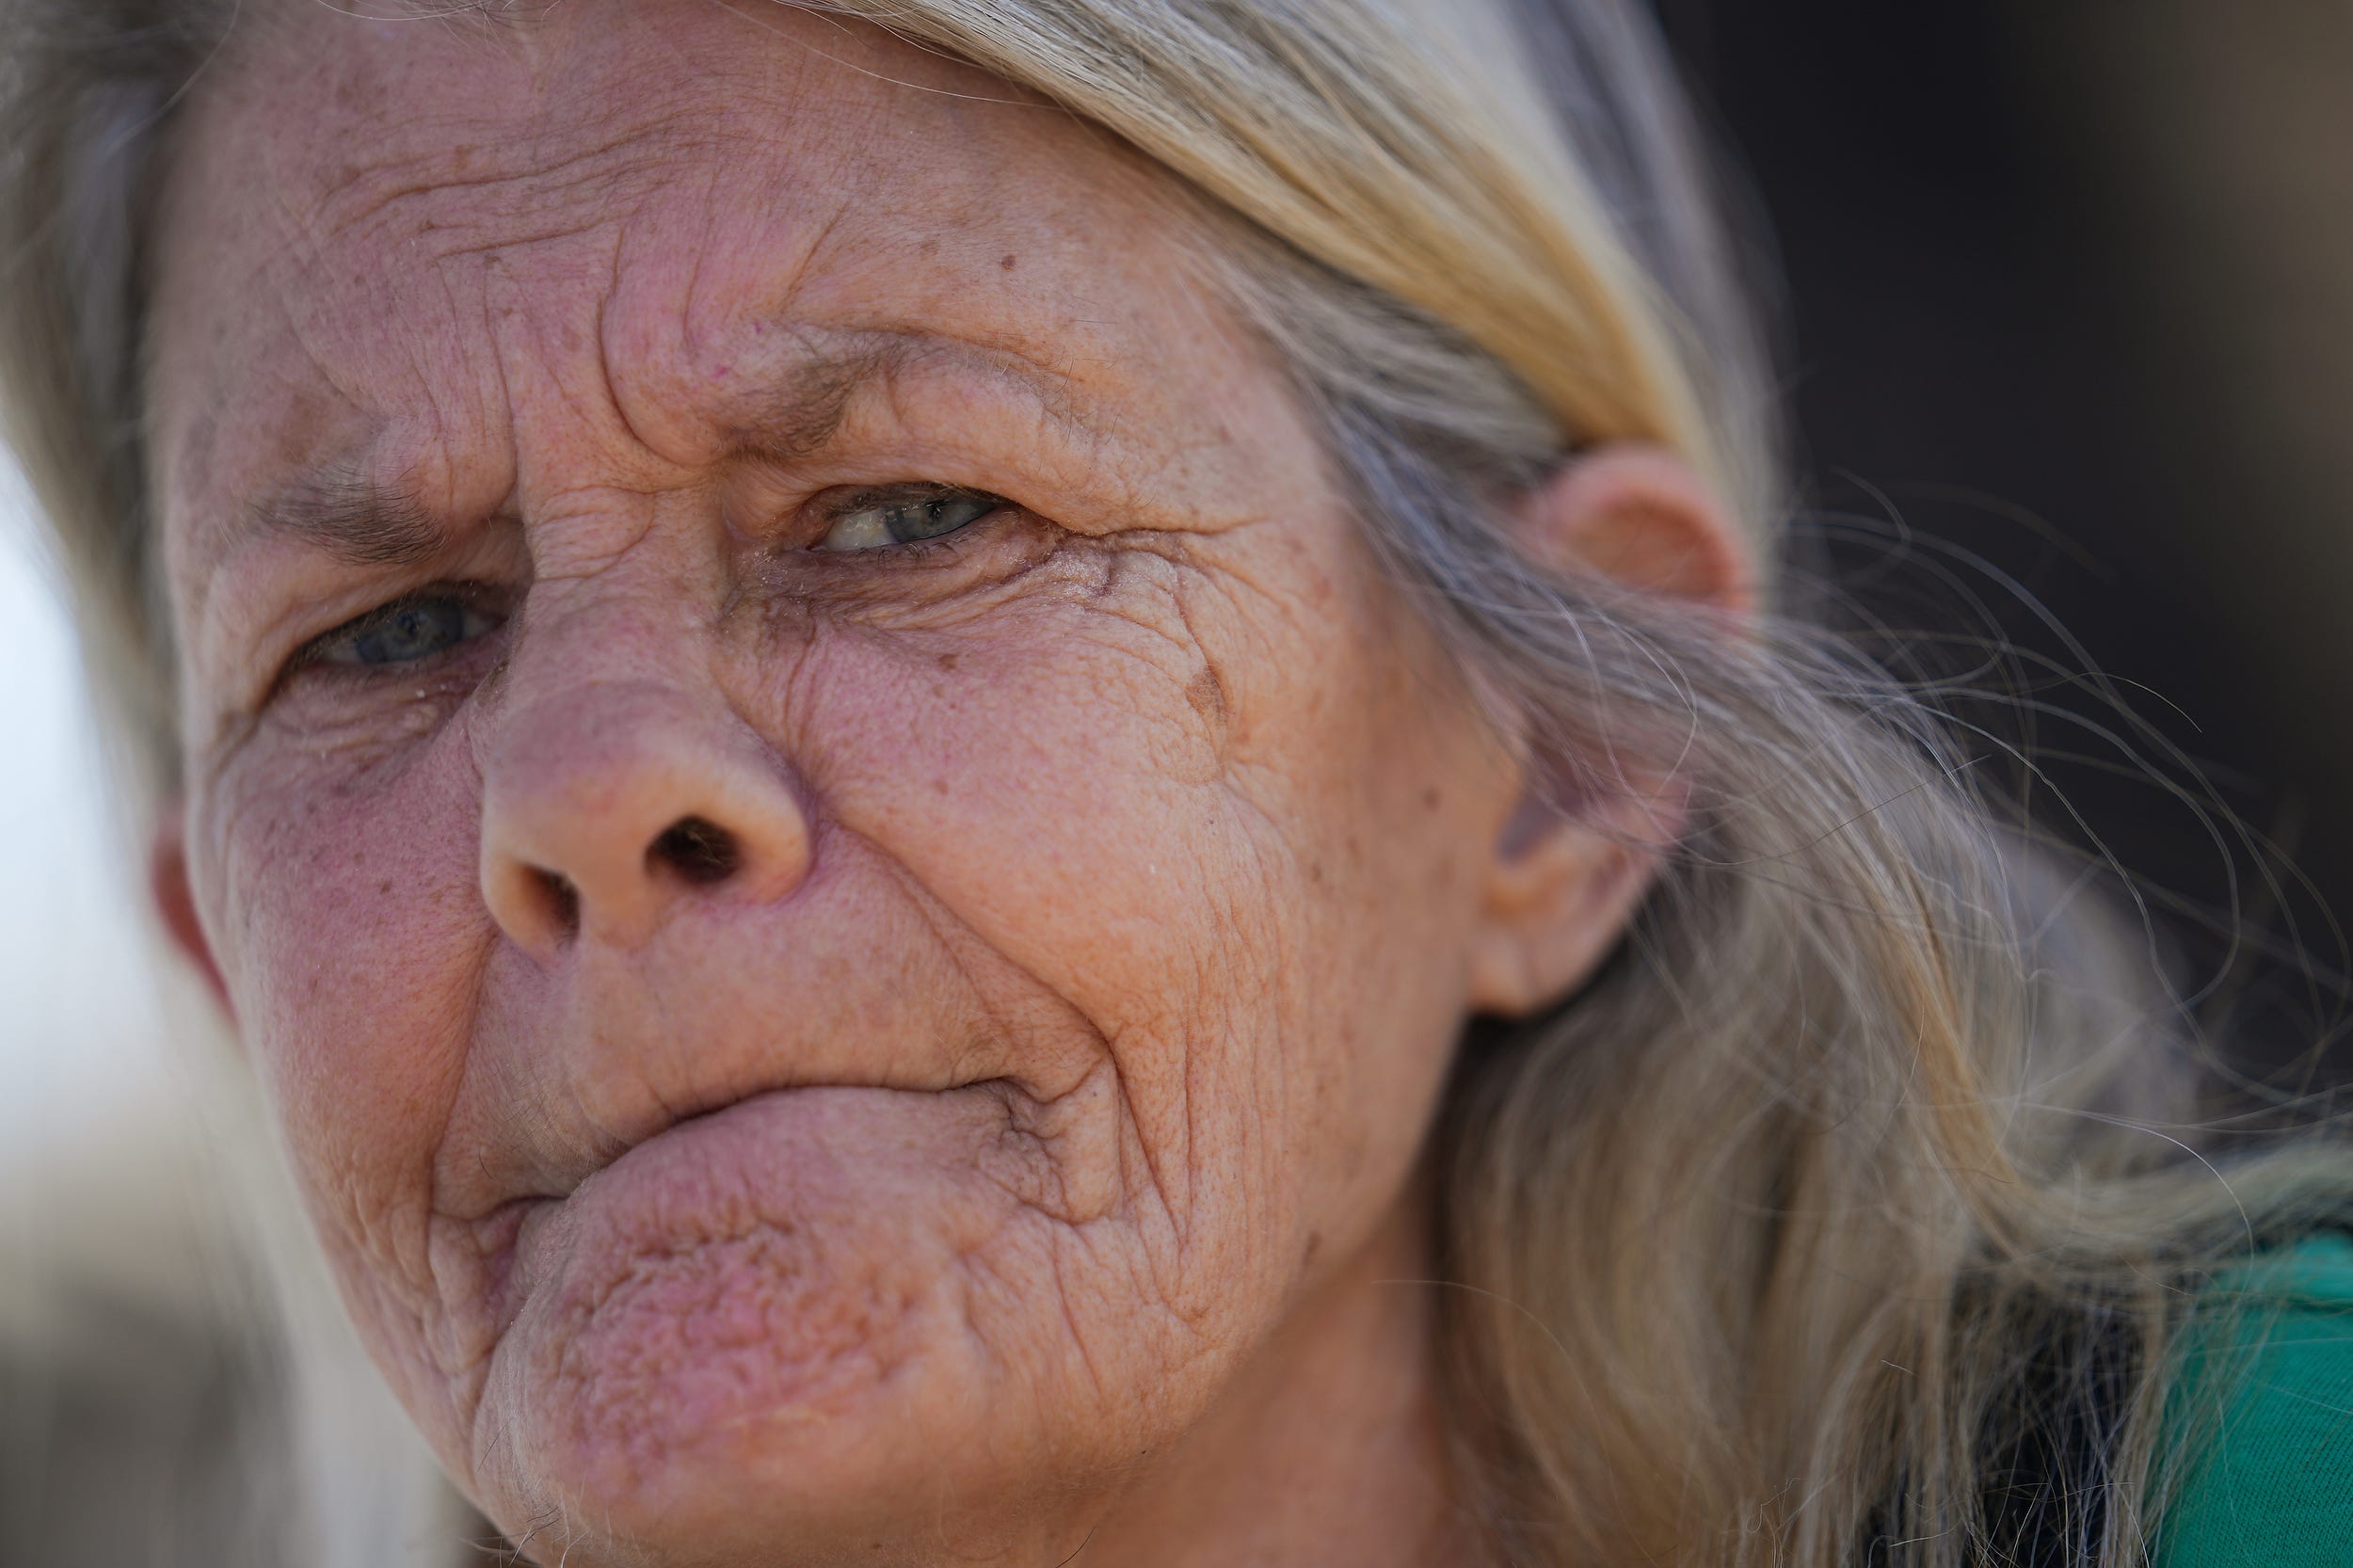 Carol Parker, 61, poses for a portrait outside her new apartment complex on Tuesday, March 15, 2022, in Phoenix. Parker was left homeless after her previous landlord decided not to accept a low-income housing voucher Parker uses to afford rent. She has osteoporosis and ended up fracturing her back in five places while living homeless. Through the help of Circle the City and over a hundred calls to landlords, she found a building that had space and would take her voucher.